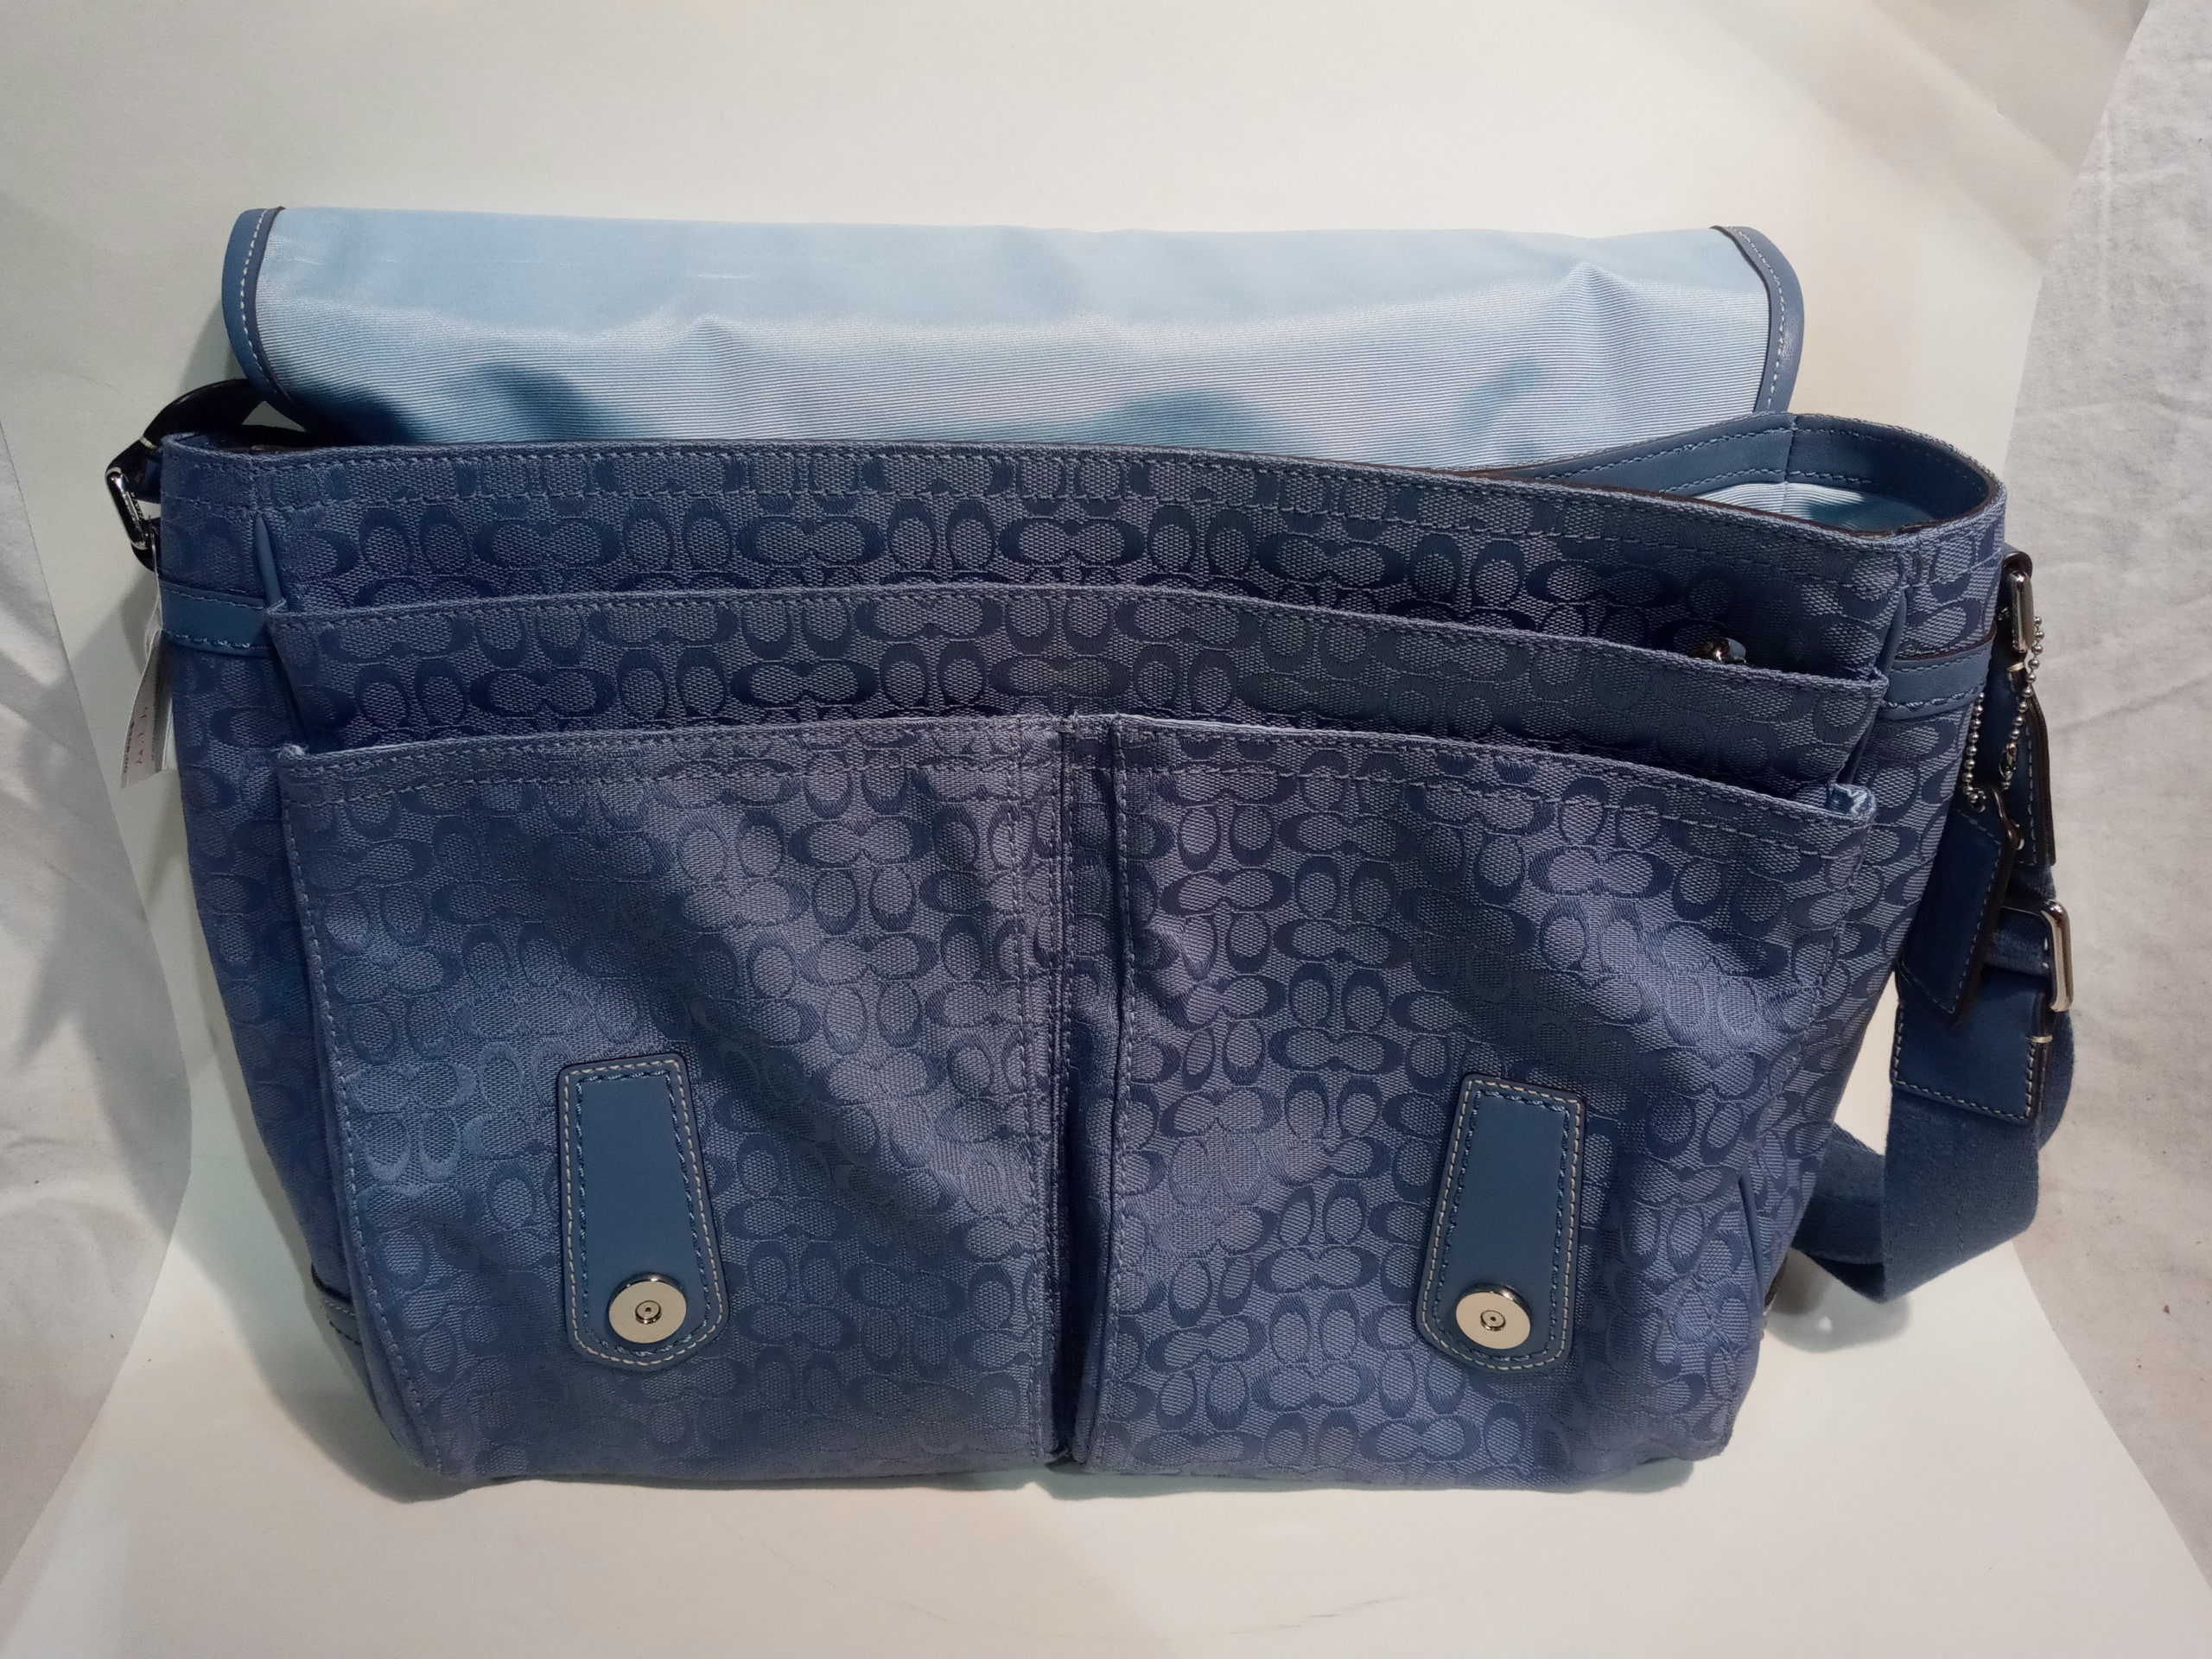 COACH Baby Messenger Bag in Blue